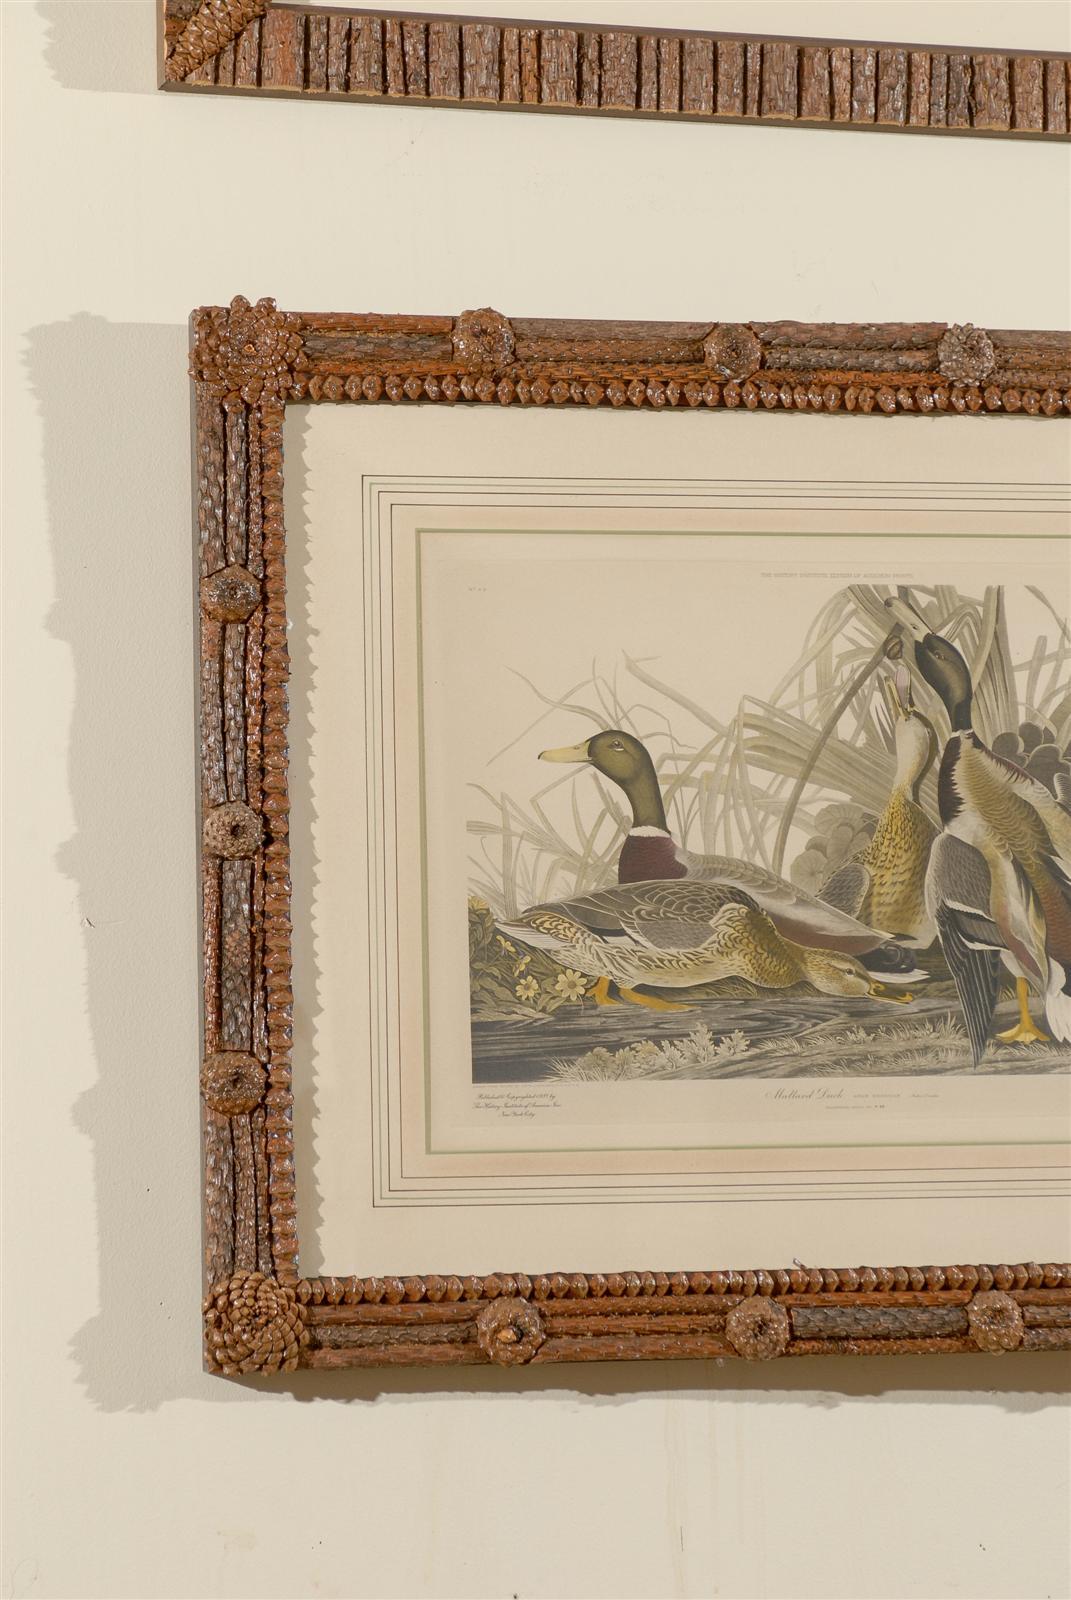 Paper Audubon Print in Hand-Crafted Pine Cone and Bark Frame